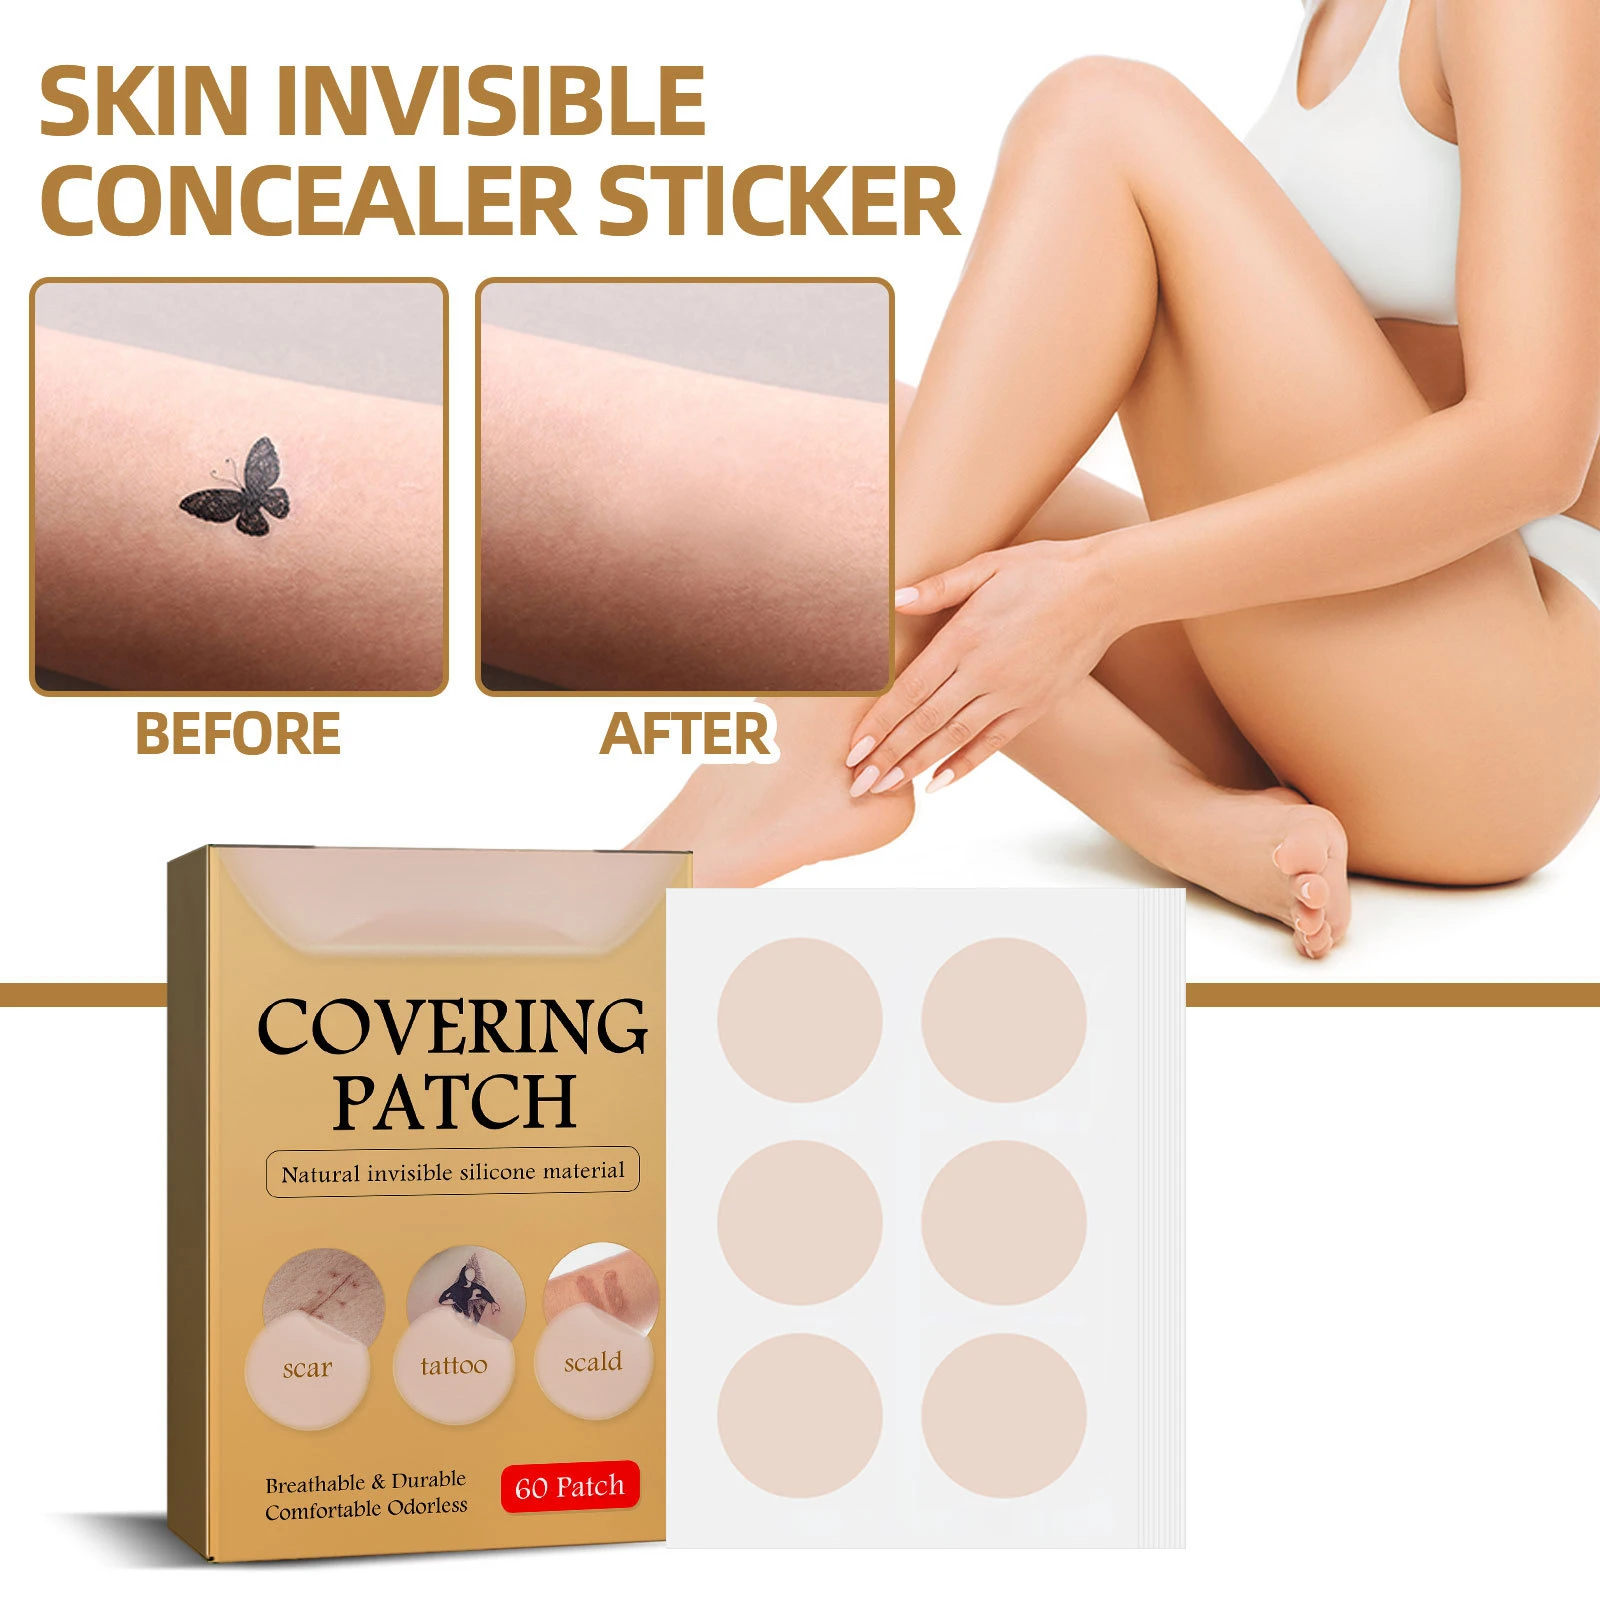 

60pcs Skin Invisible Concealer Sticker Body Scar Tattoo Acne Mark Covering Sticker Invisible Waterproof Facial Skin Care Tool